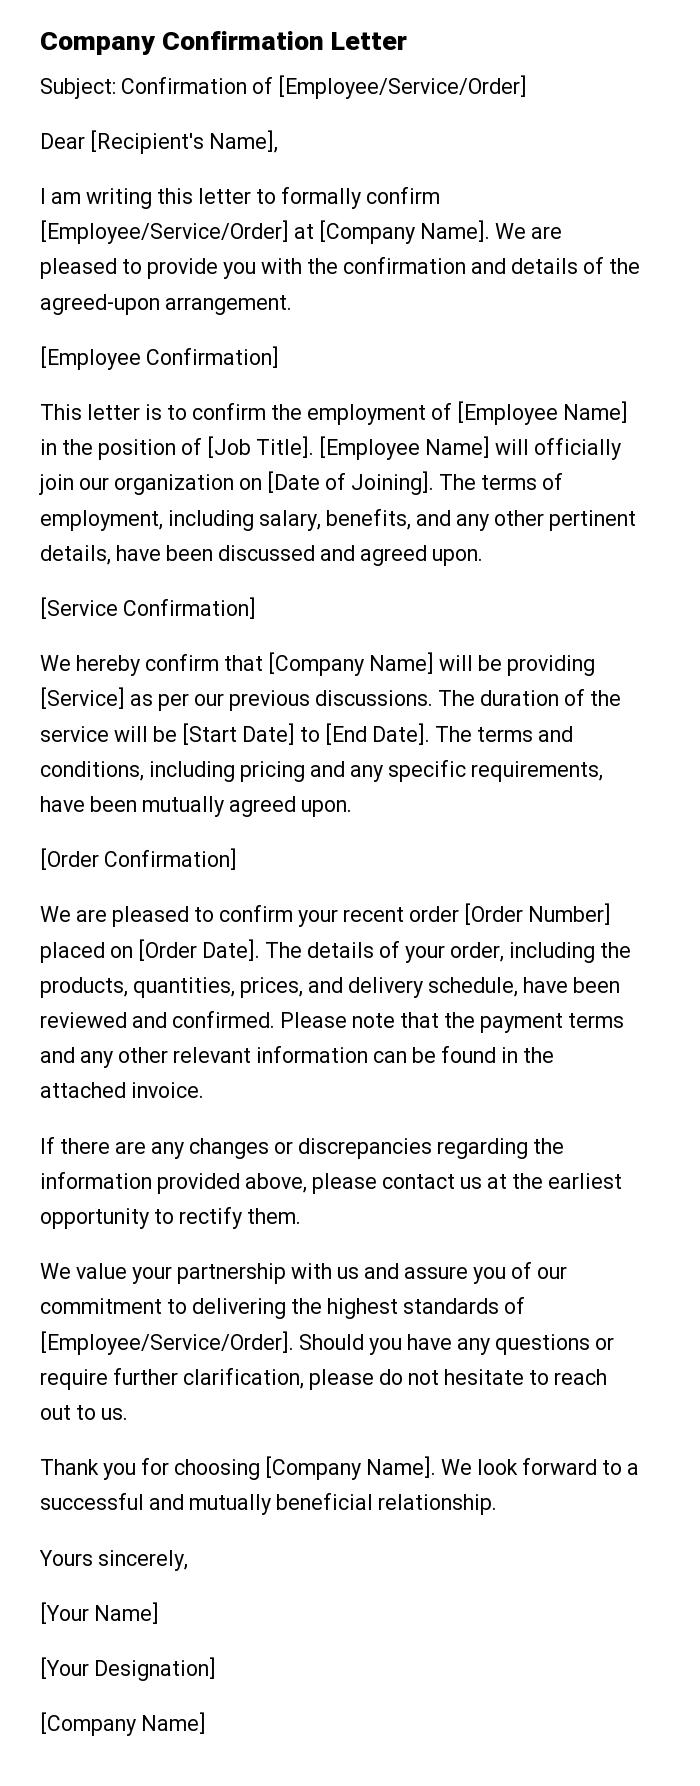 Company Confirmation Letter